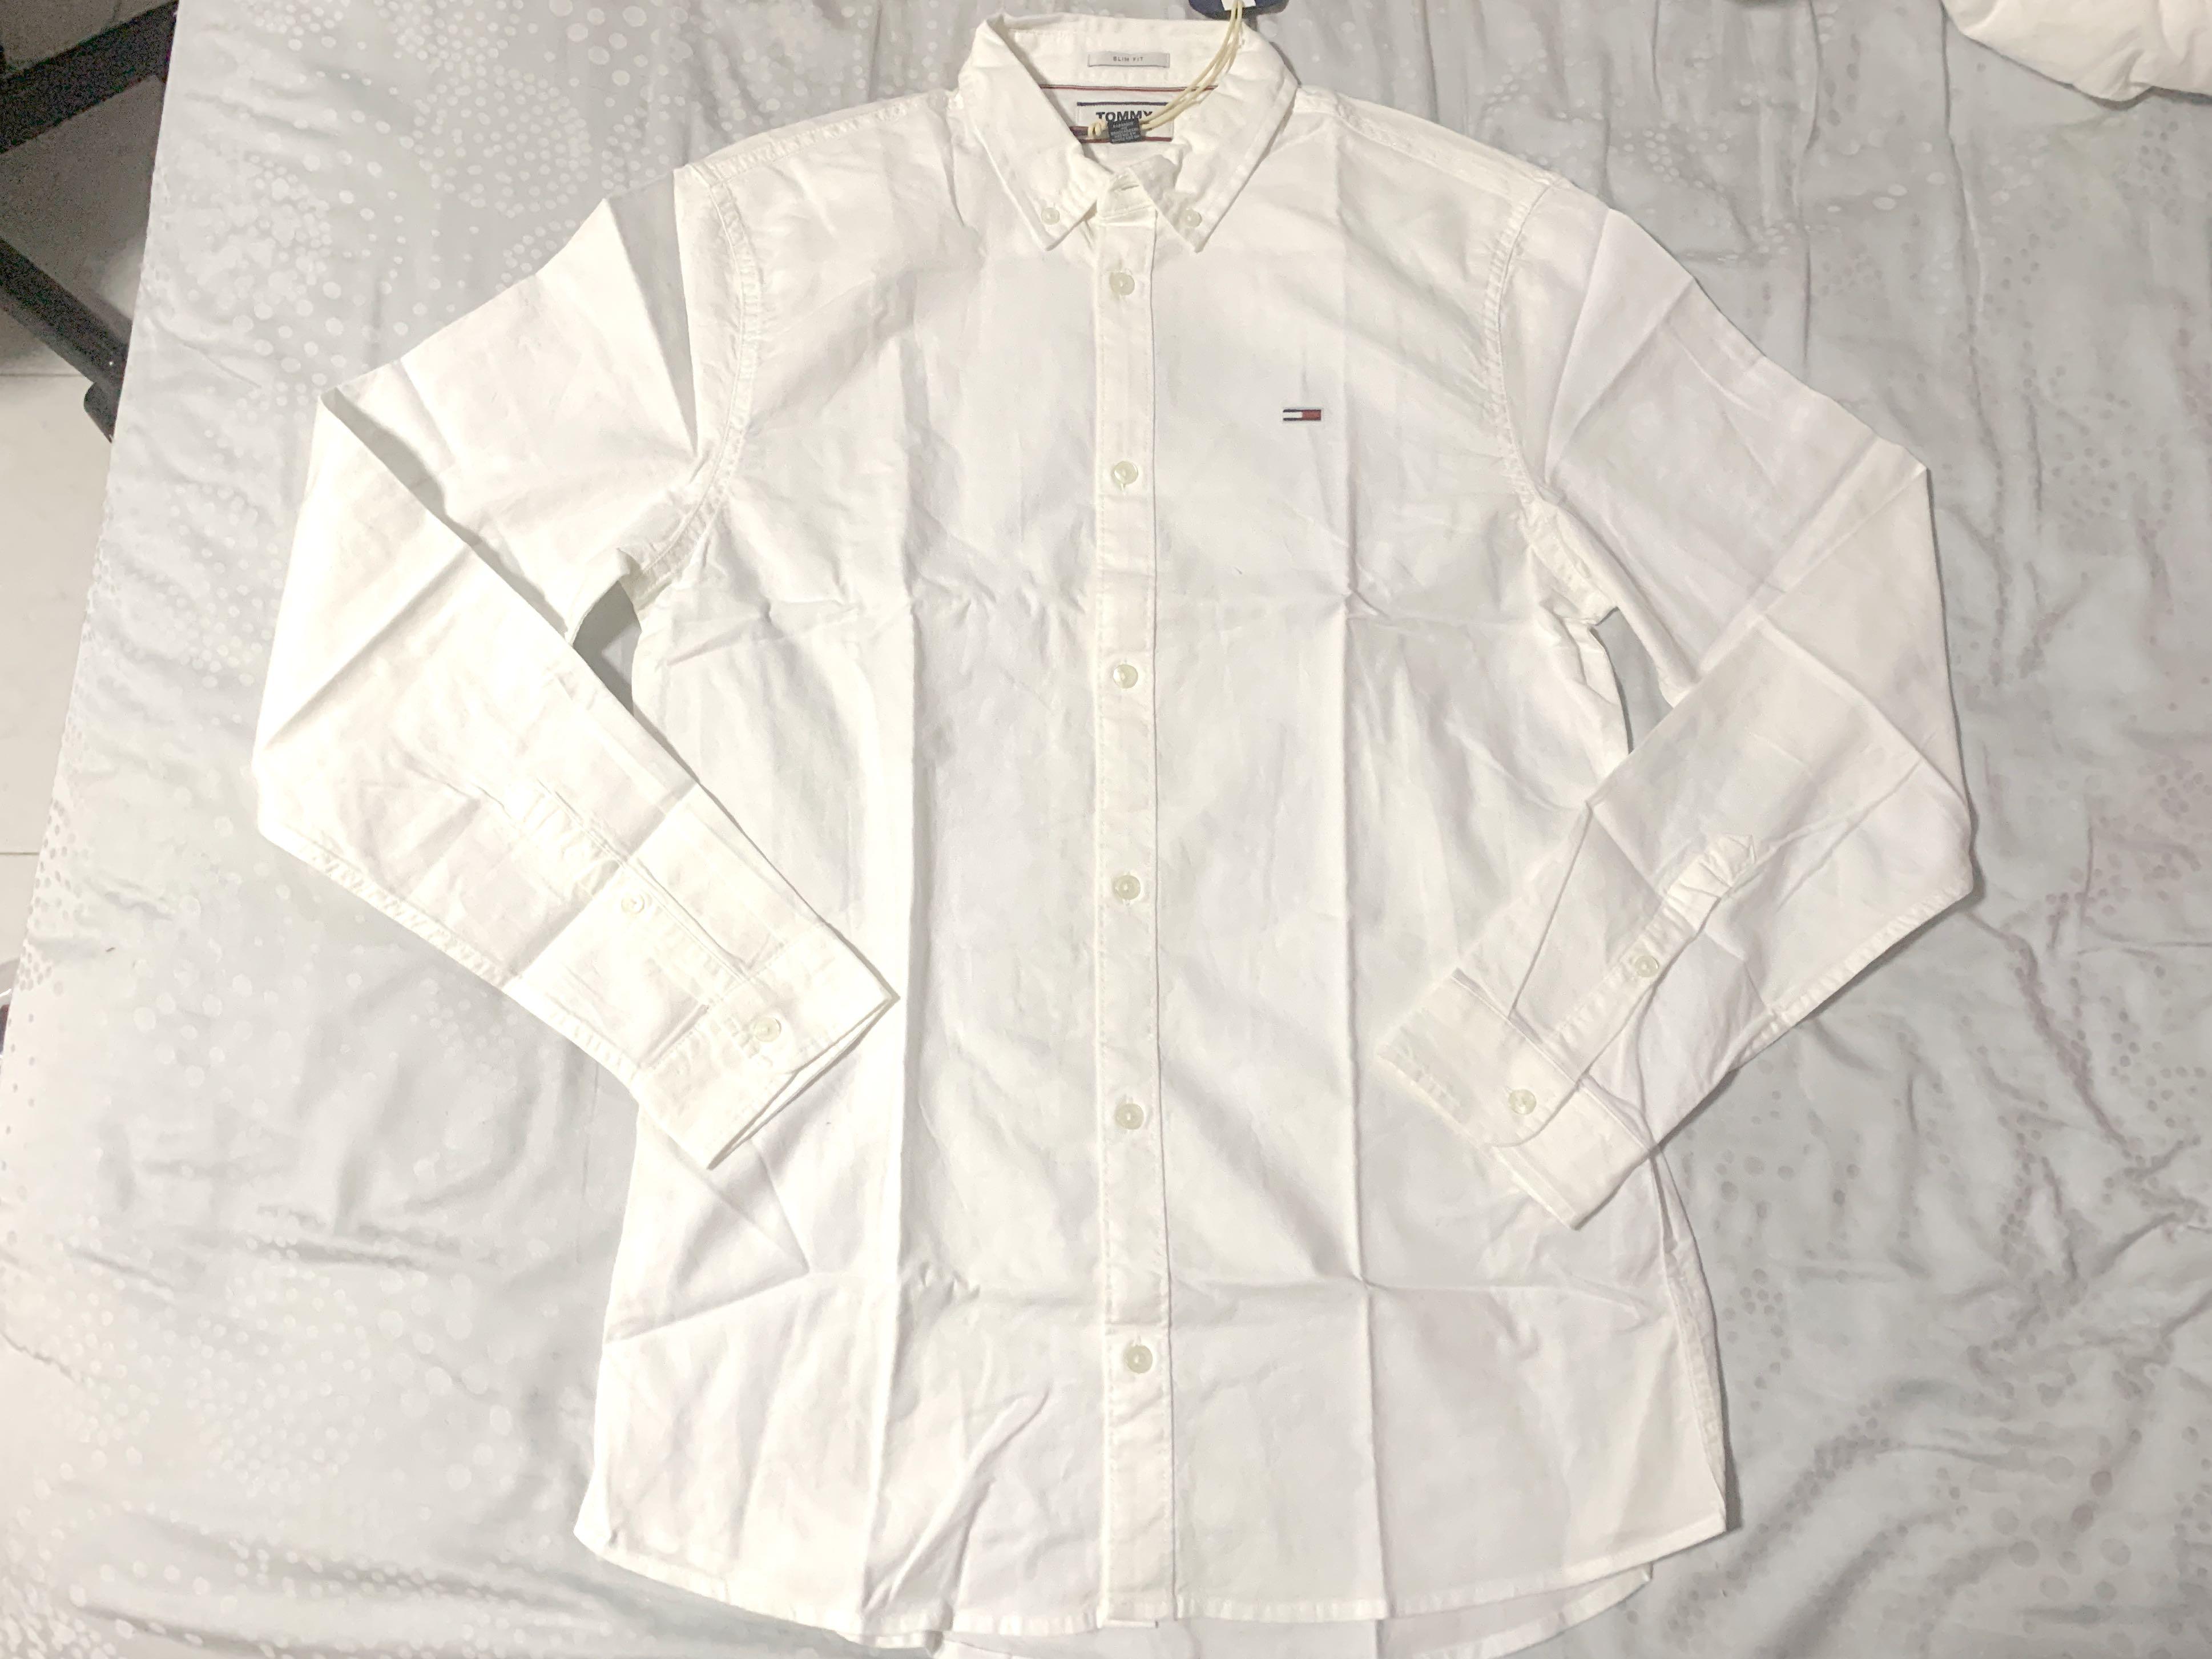 BNWT Tommy Jeans Classic Oxford Long Sleeve Shirt Tommy Hilfiger Shirt 